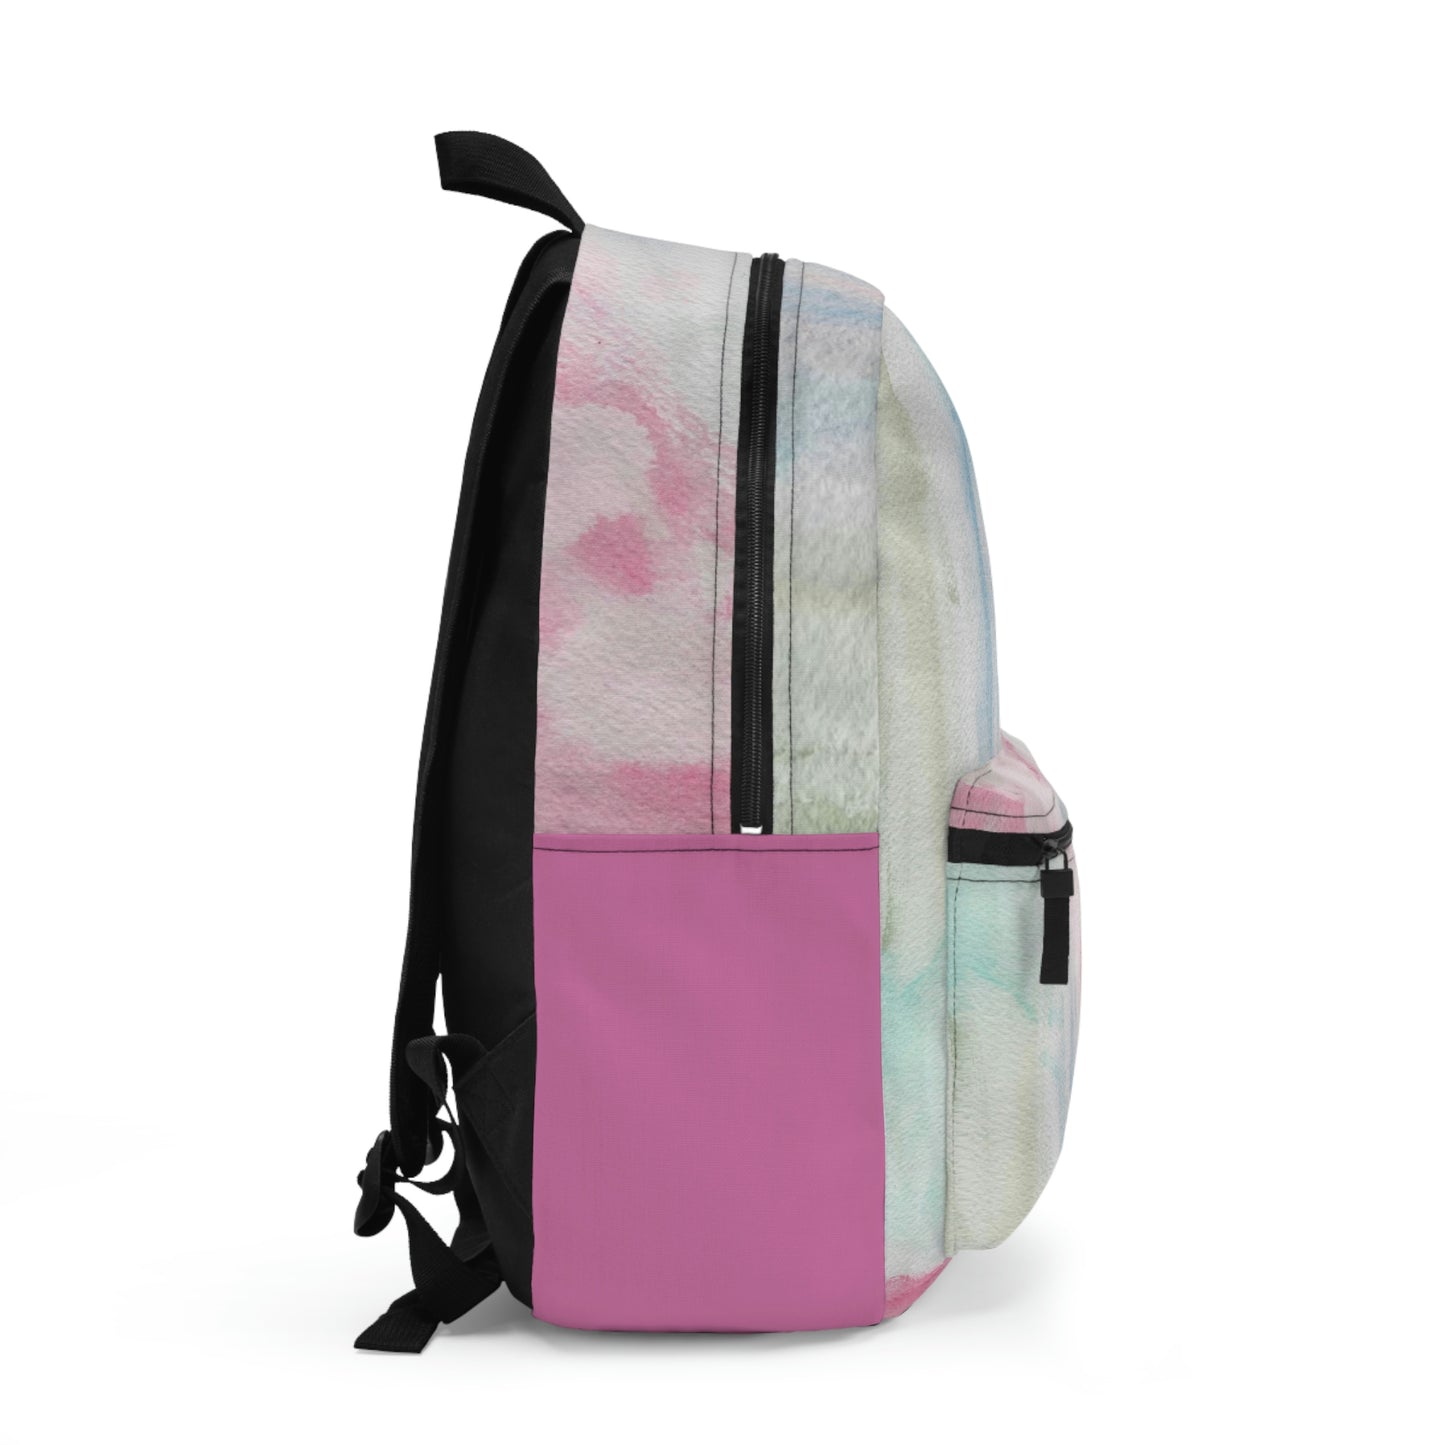 Cotton Candy Sky Backpack